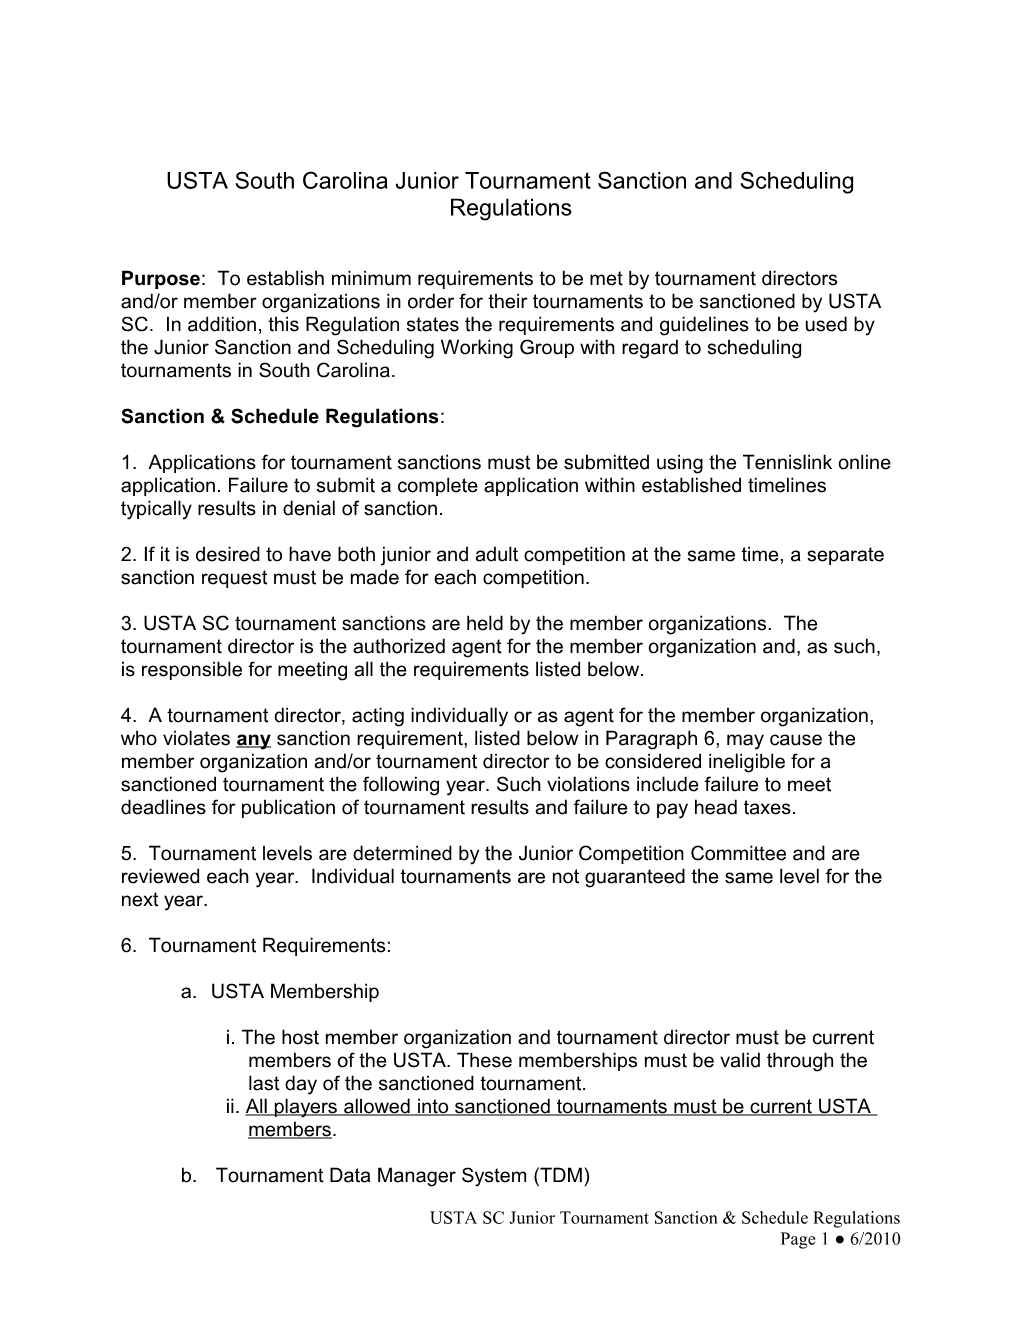 Policy on USTA South Carolina Tournament Sanction and Scheduling